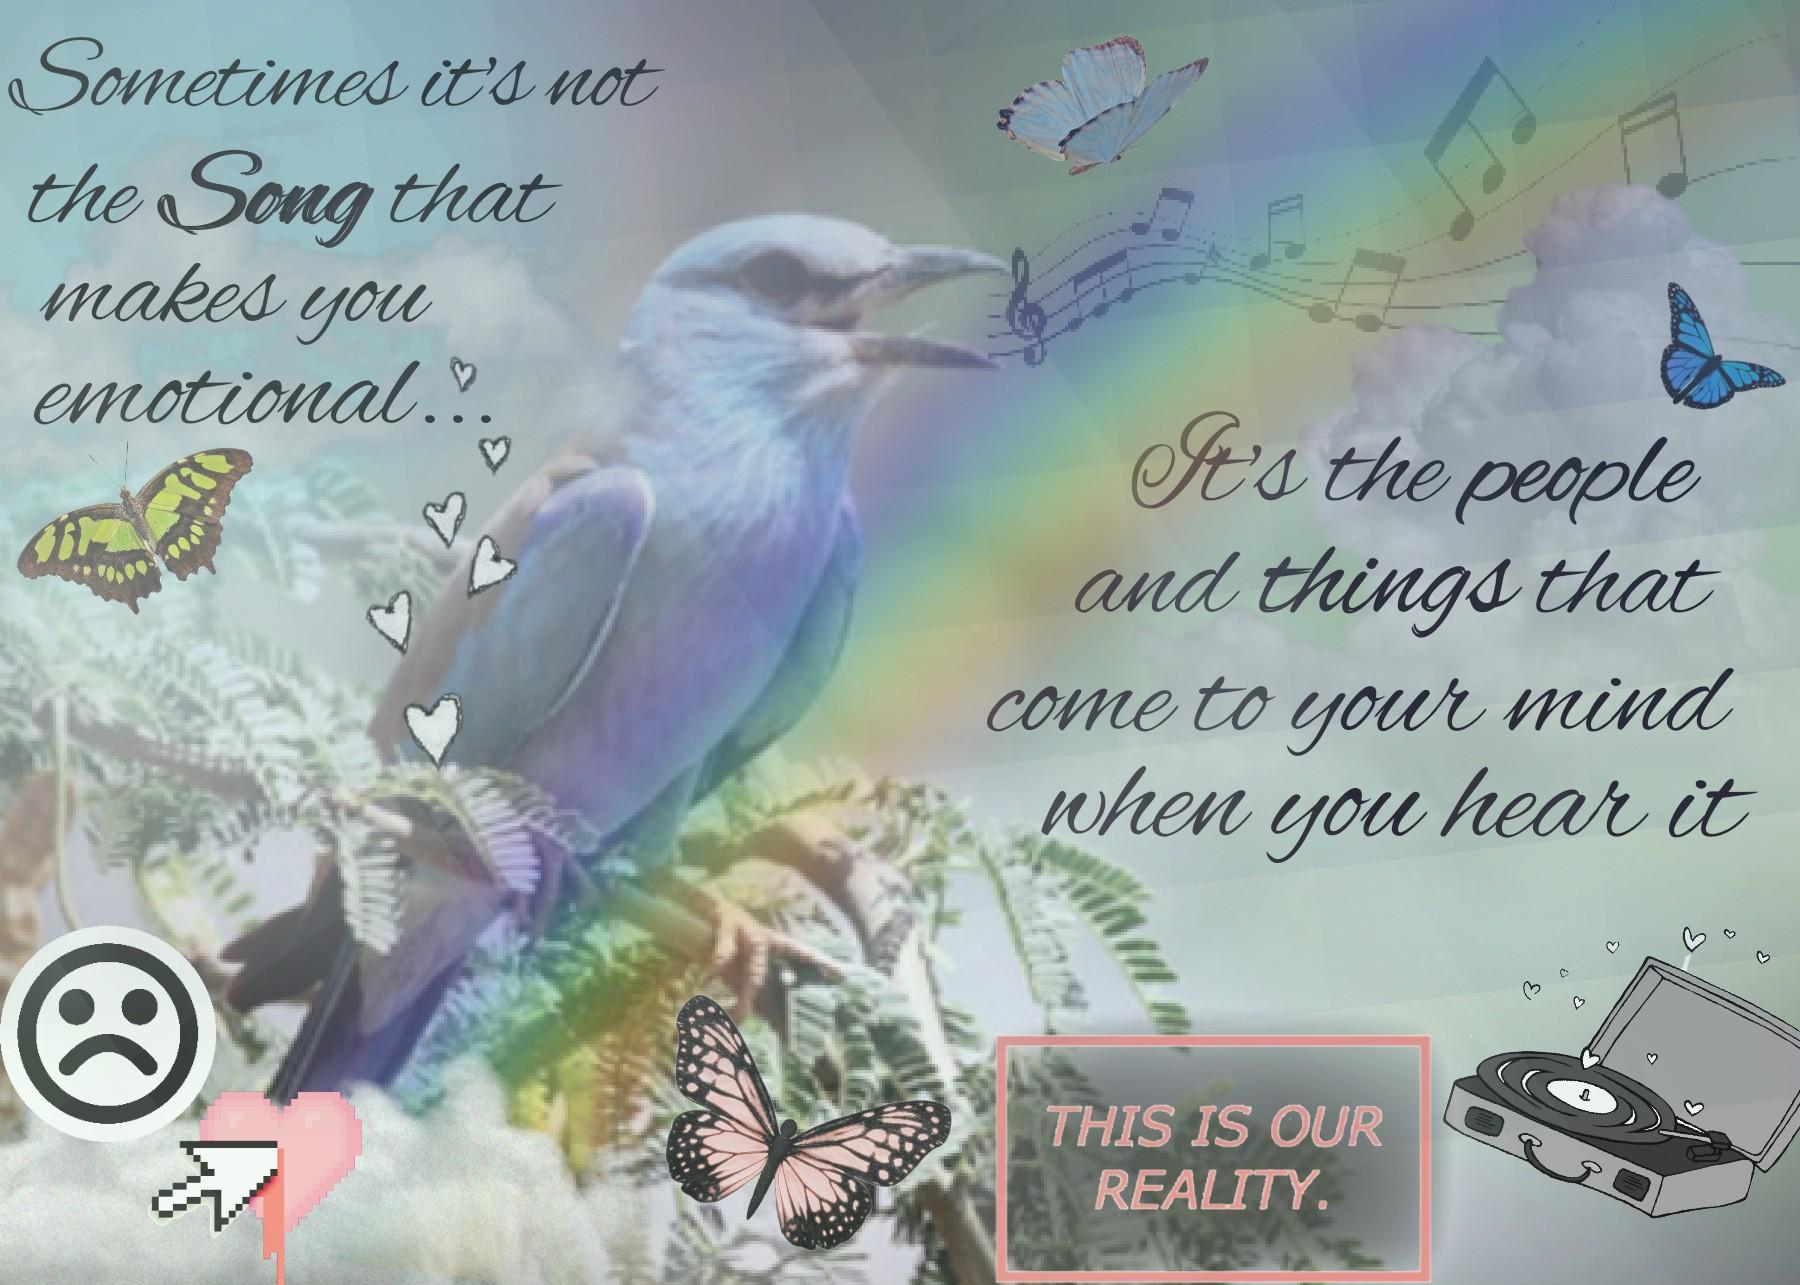 🎶🐦🎵 

Aesthetic Music Bird Collage 

Not my best, but I saw the quote and thought about making a collage about it. Hope you like it! :")